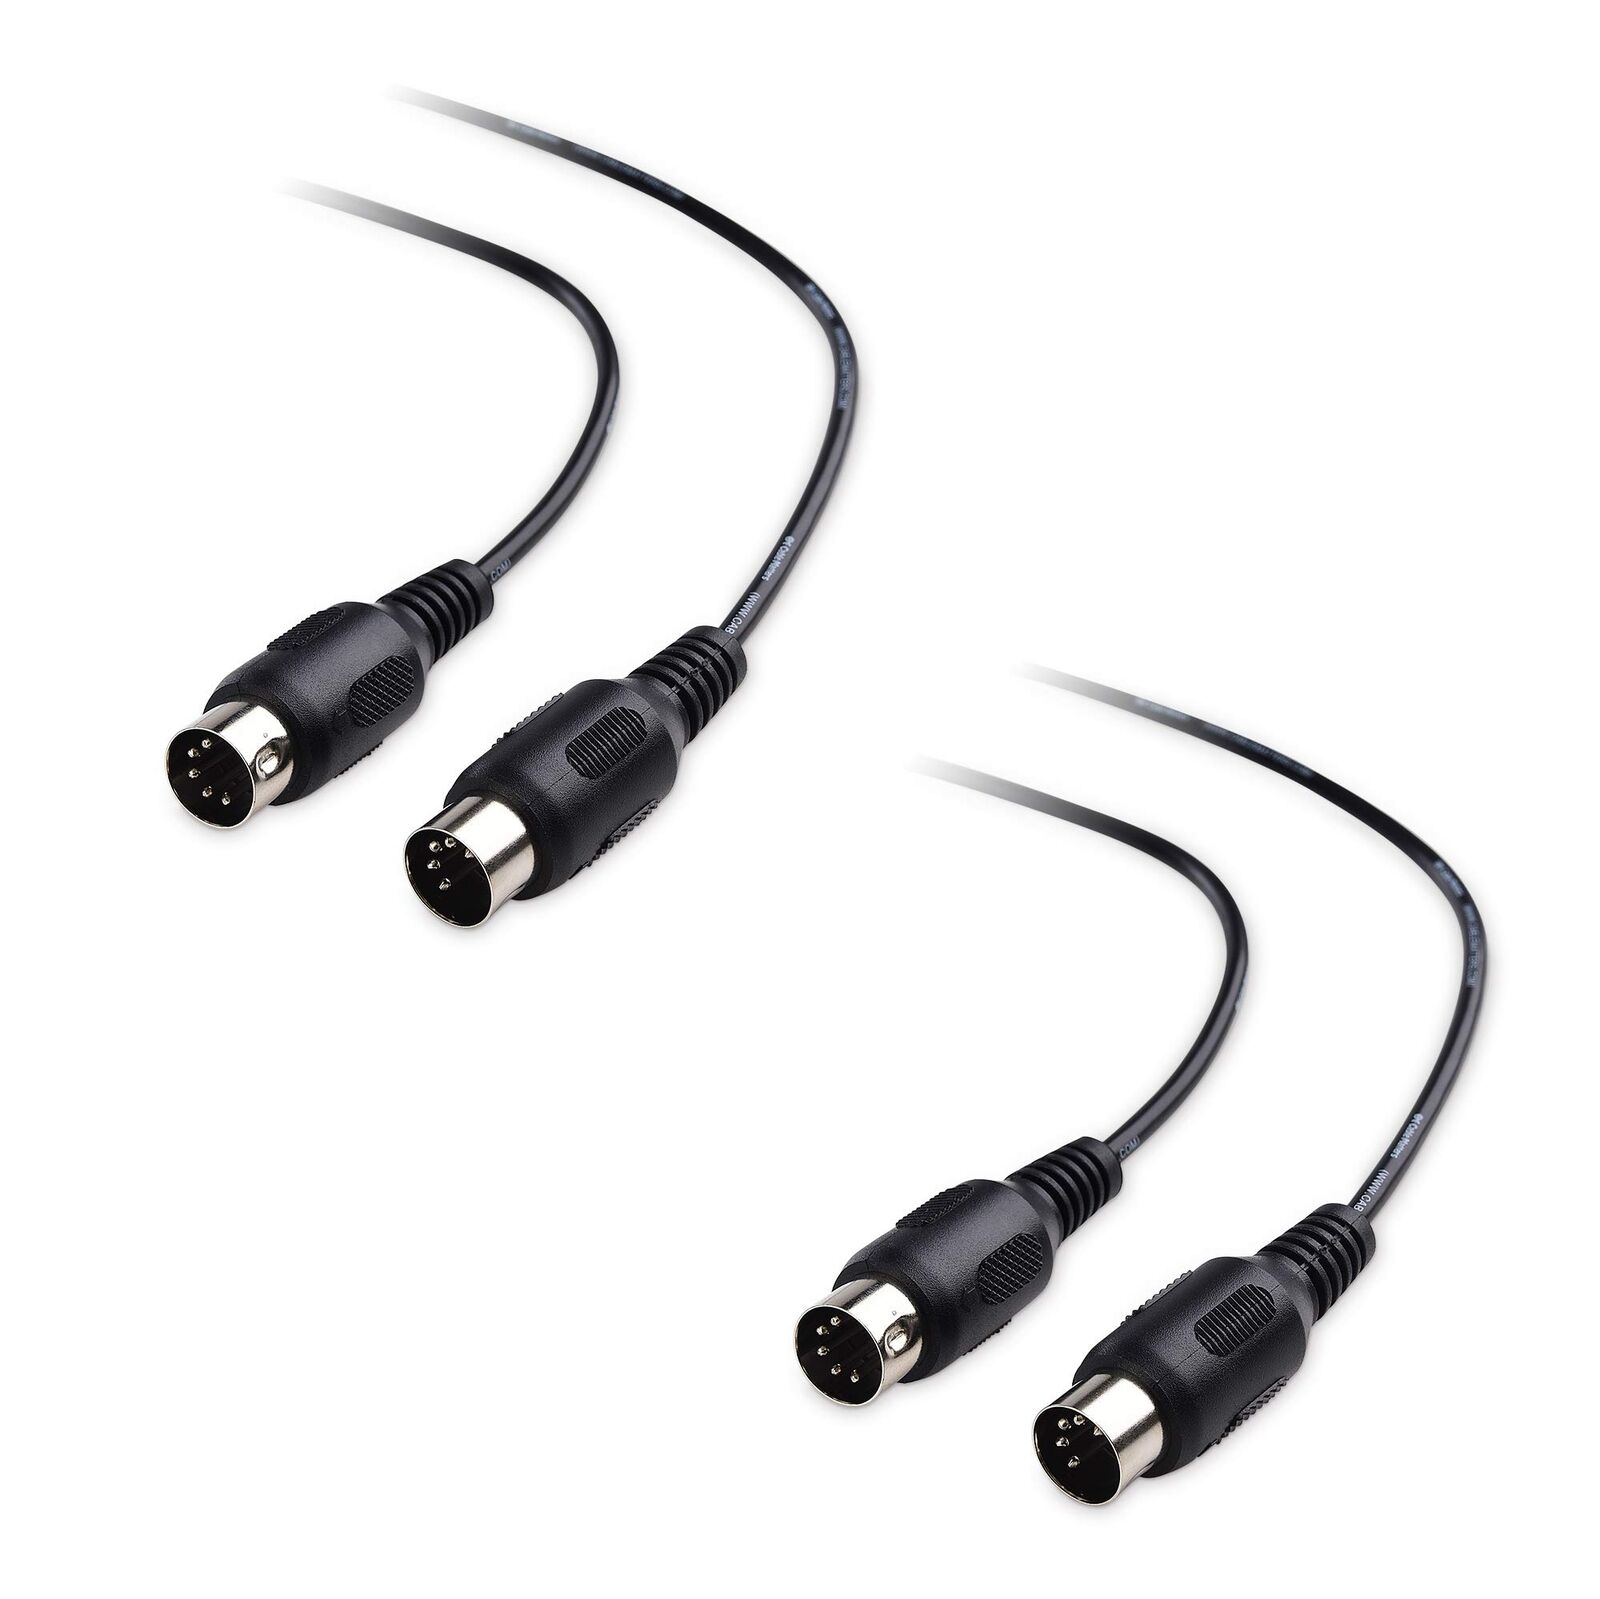 Cable Matters Midii Cable 5-Pin Din Midi Cable Set Of 2 1.8M Brand 500041-6X2